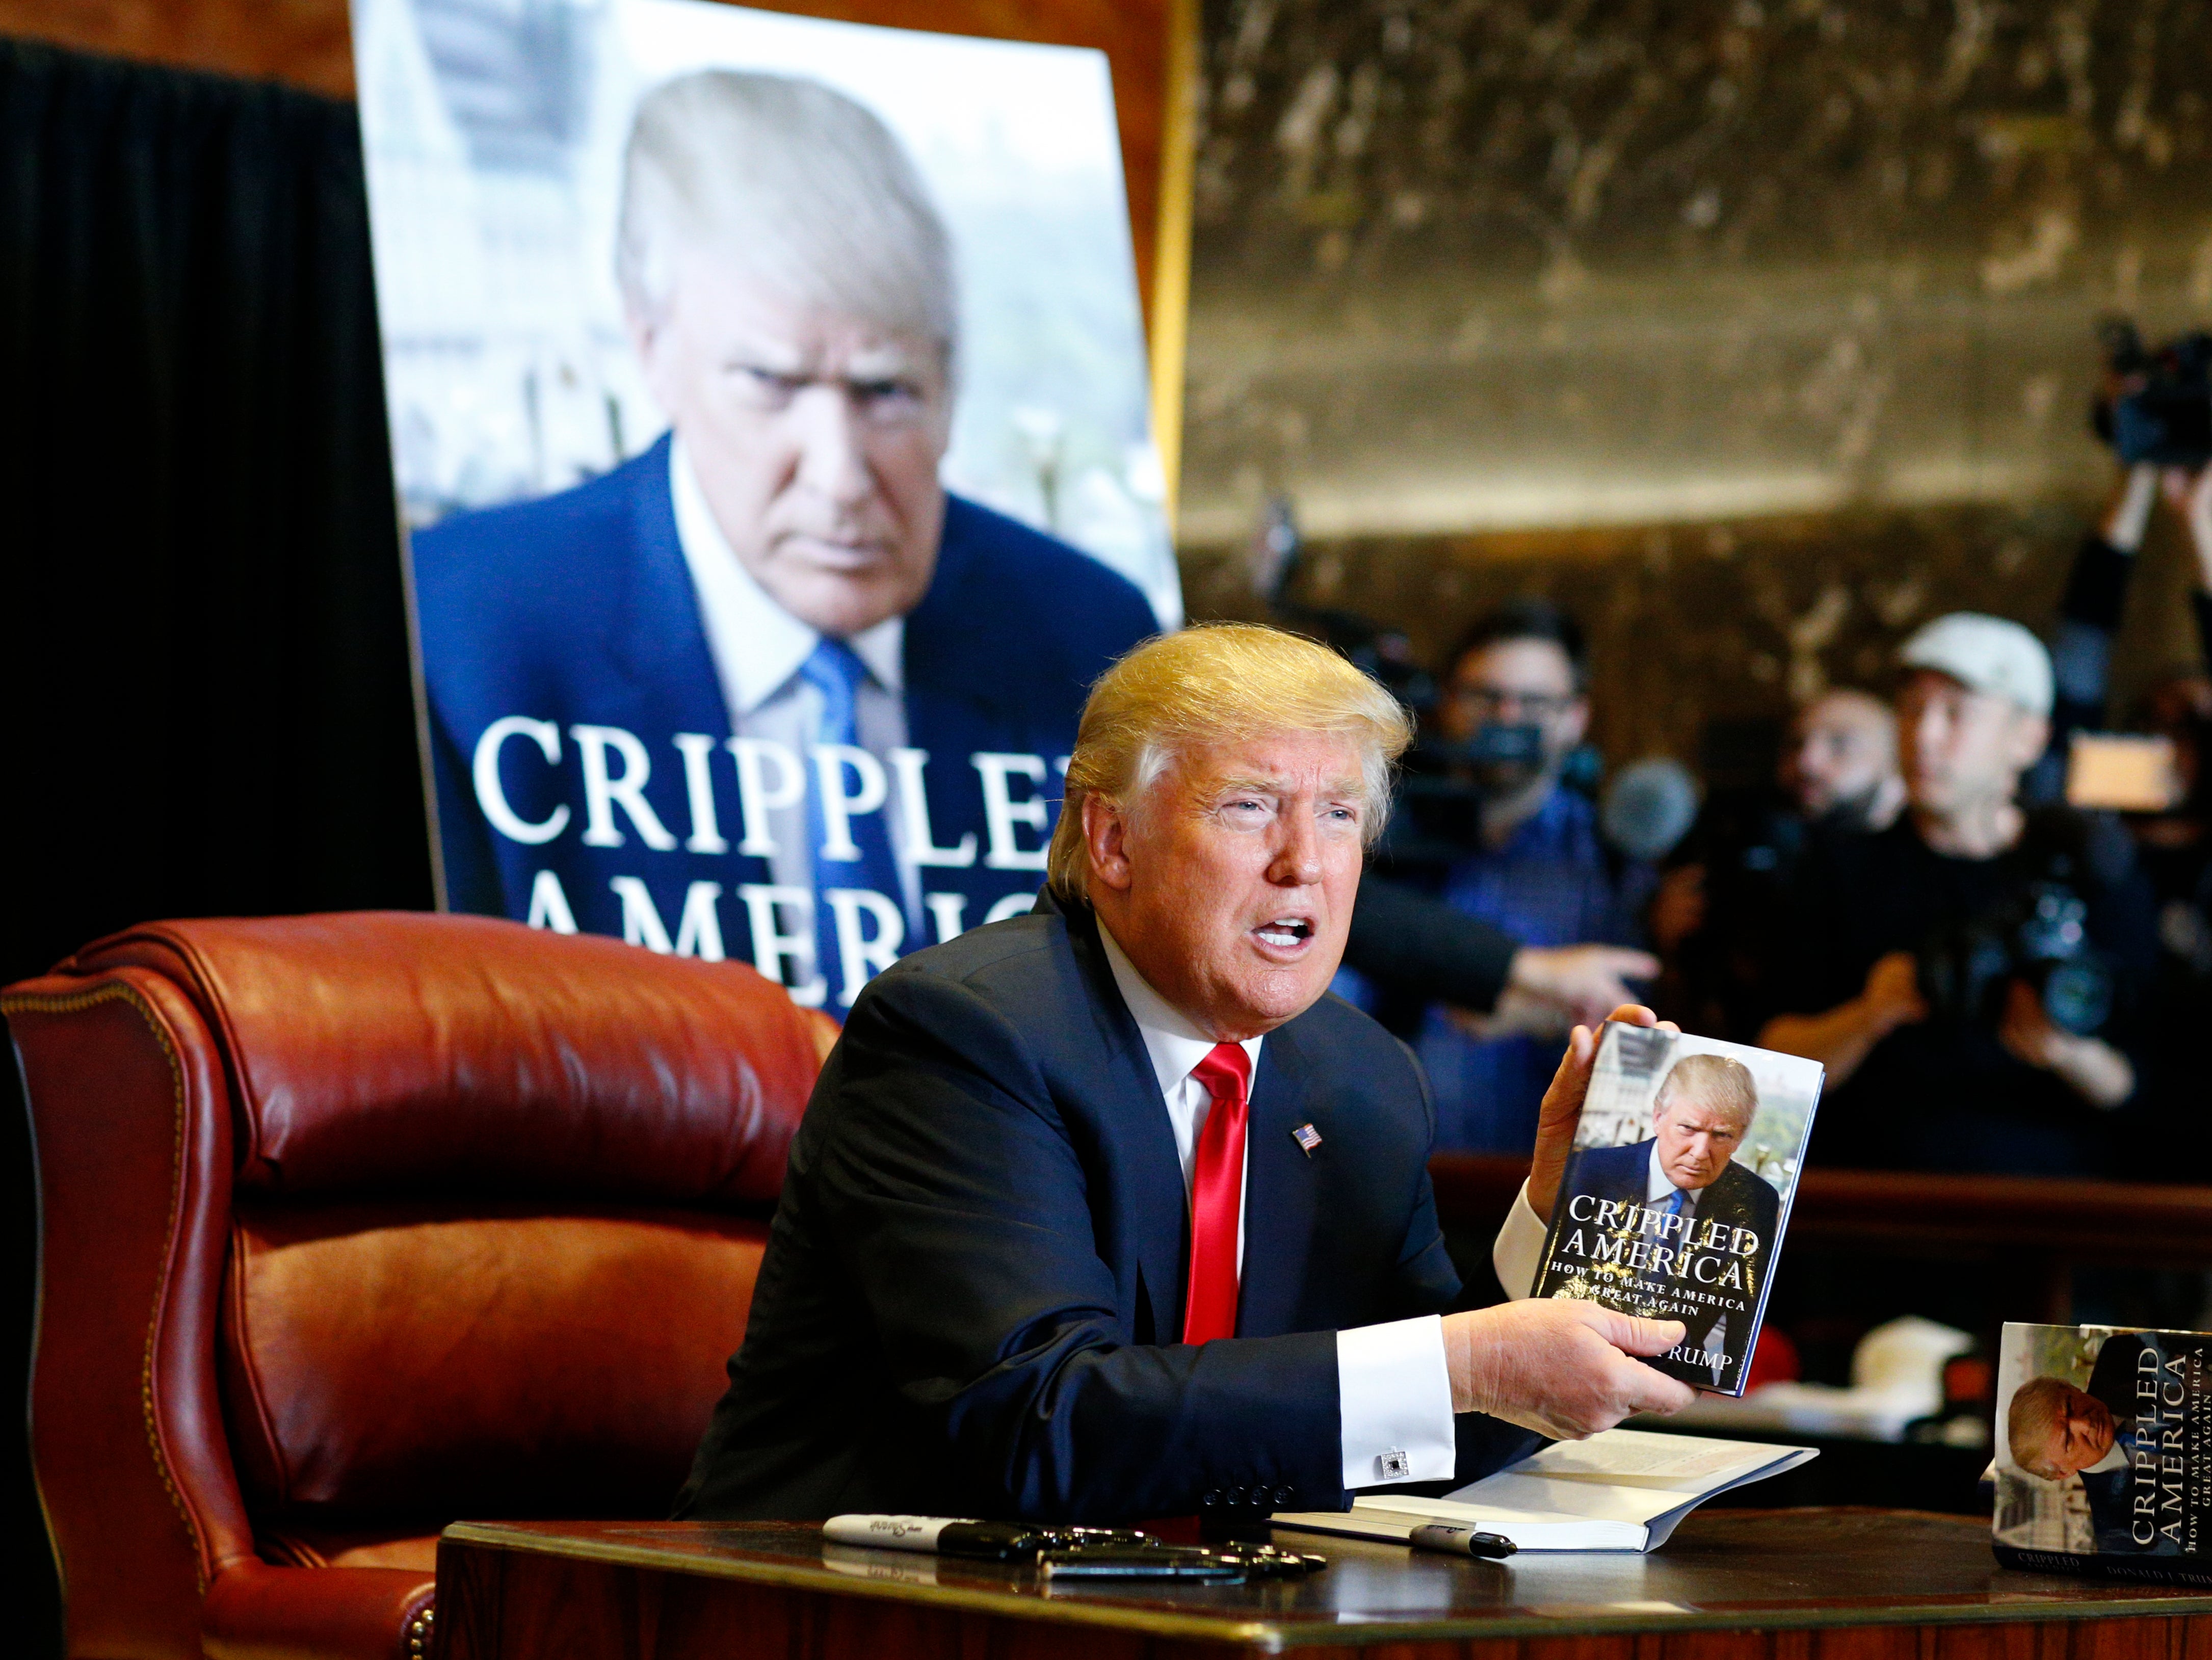 Donald Trump signs copies of his 2015 book, Crippled America